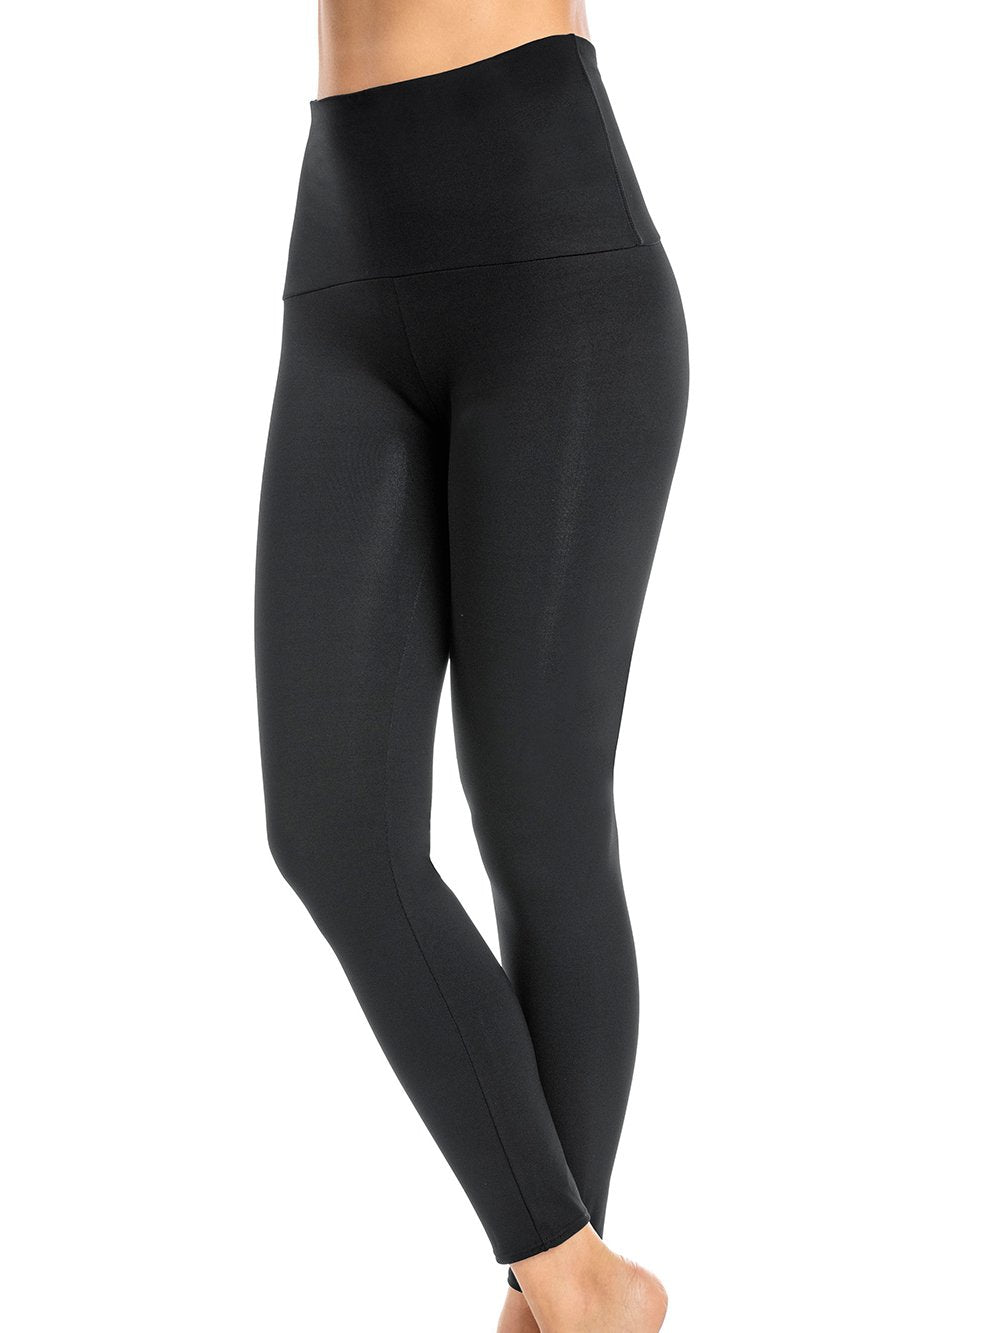 Extra Strong Compression Leggings with Figure Firming Black XS / Black /  Regular 32